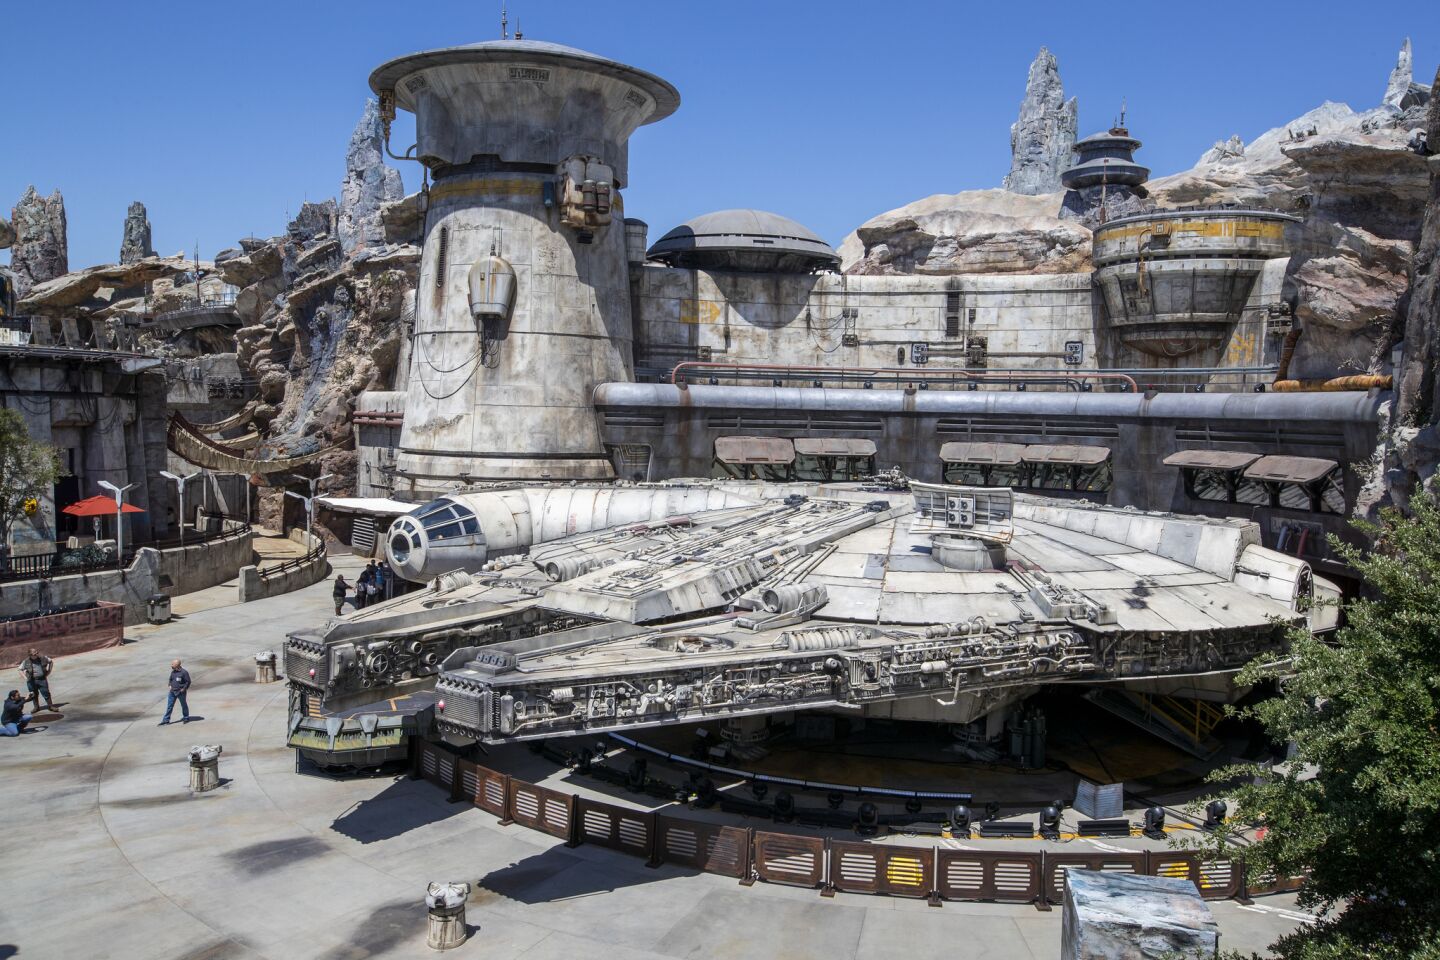 Who is the creator of Star Wars: Galaxy's Edge?